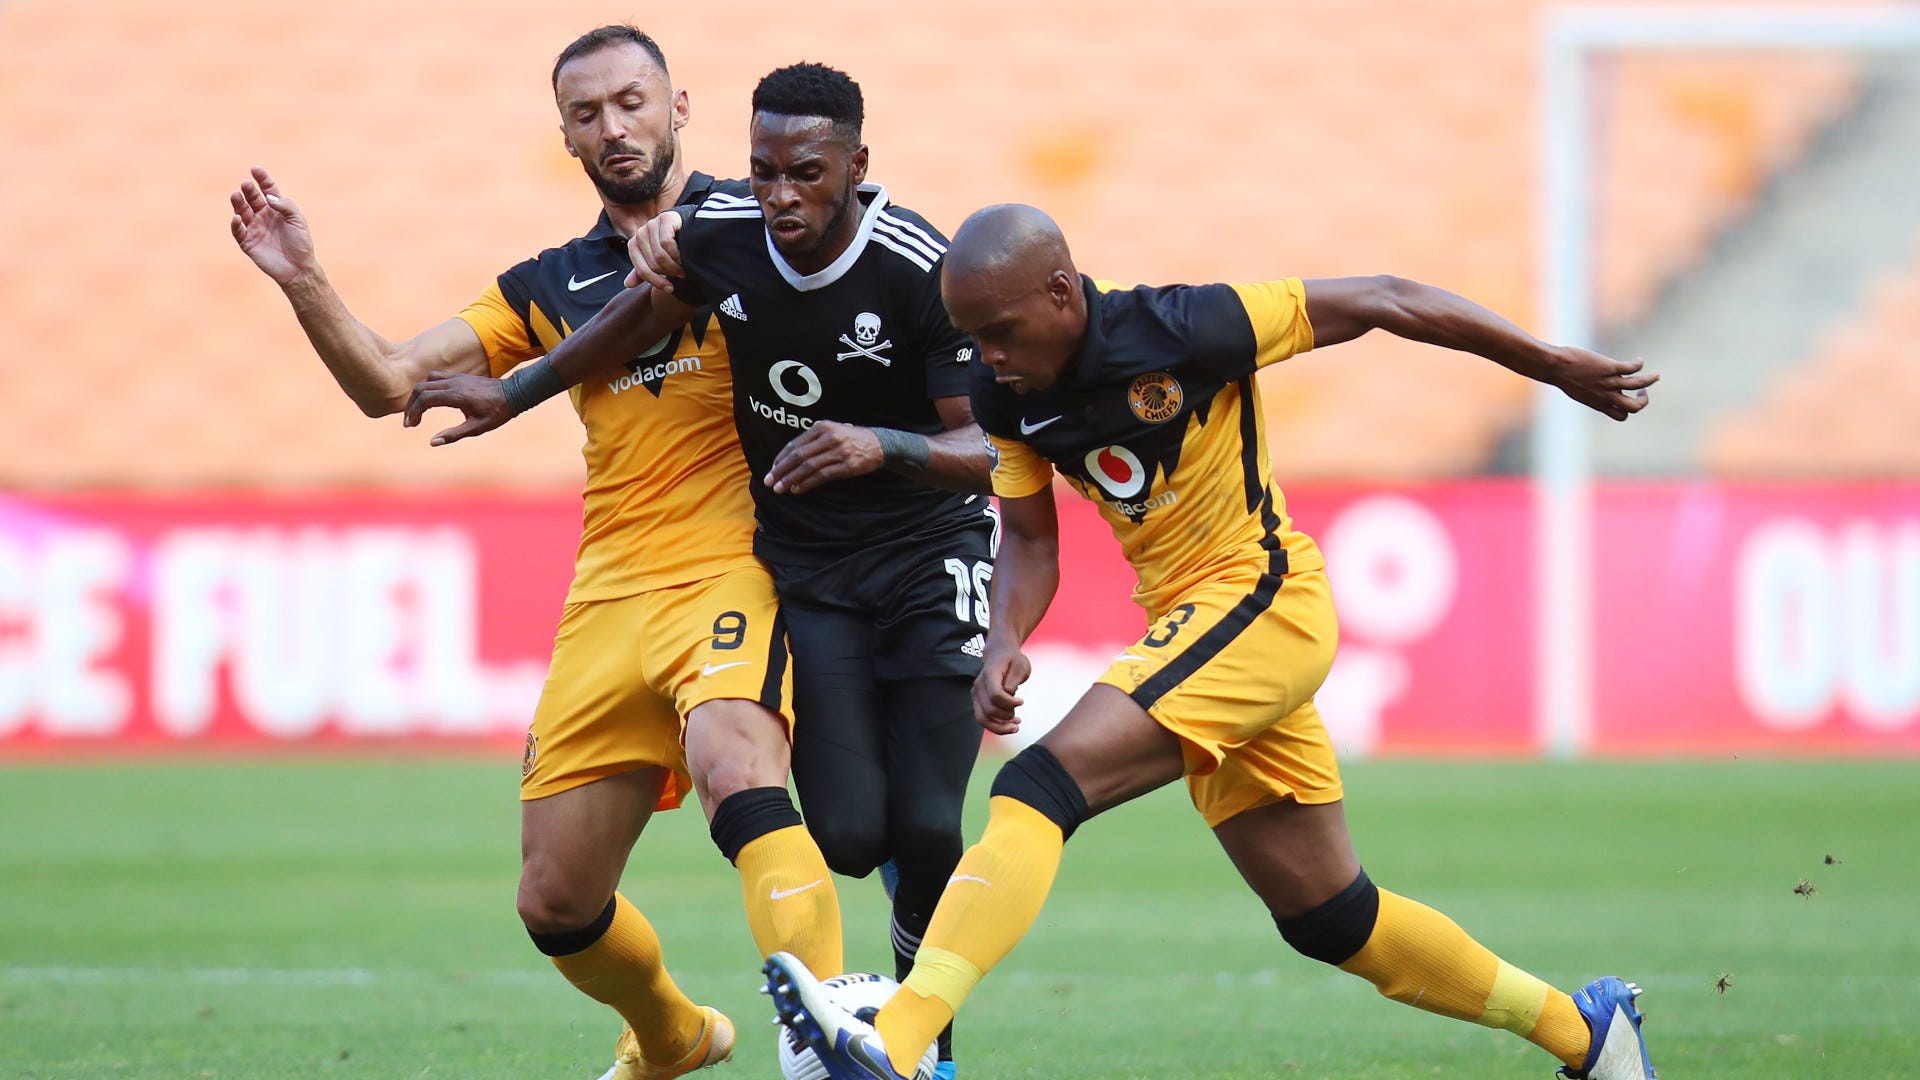 Carling Black Label Cup: The history between Kaizer Chiefs and Orlando  Pirates - Goalpedia